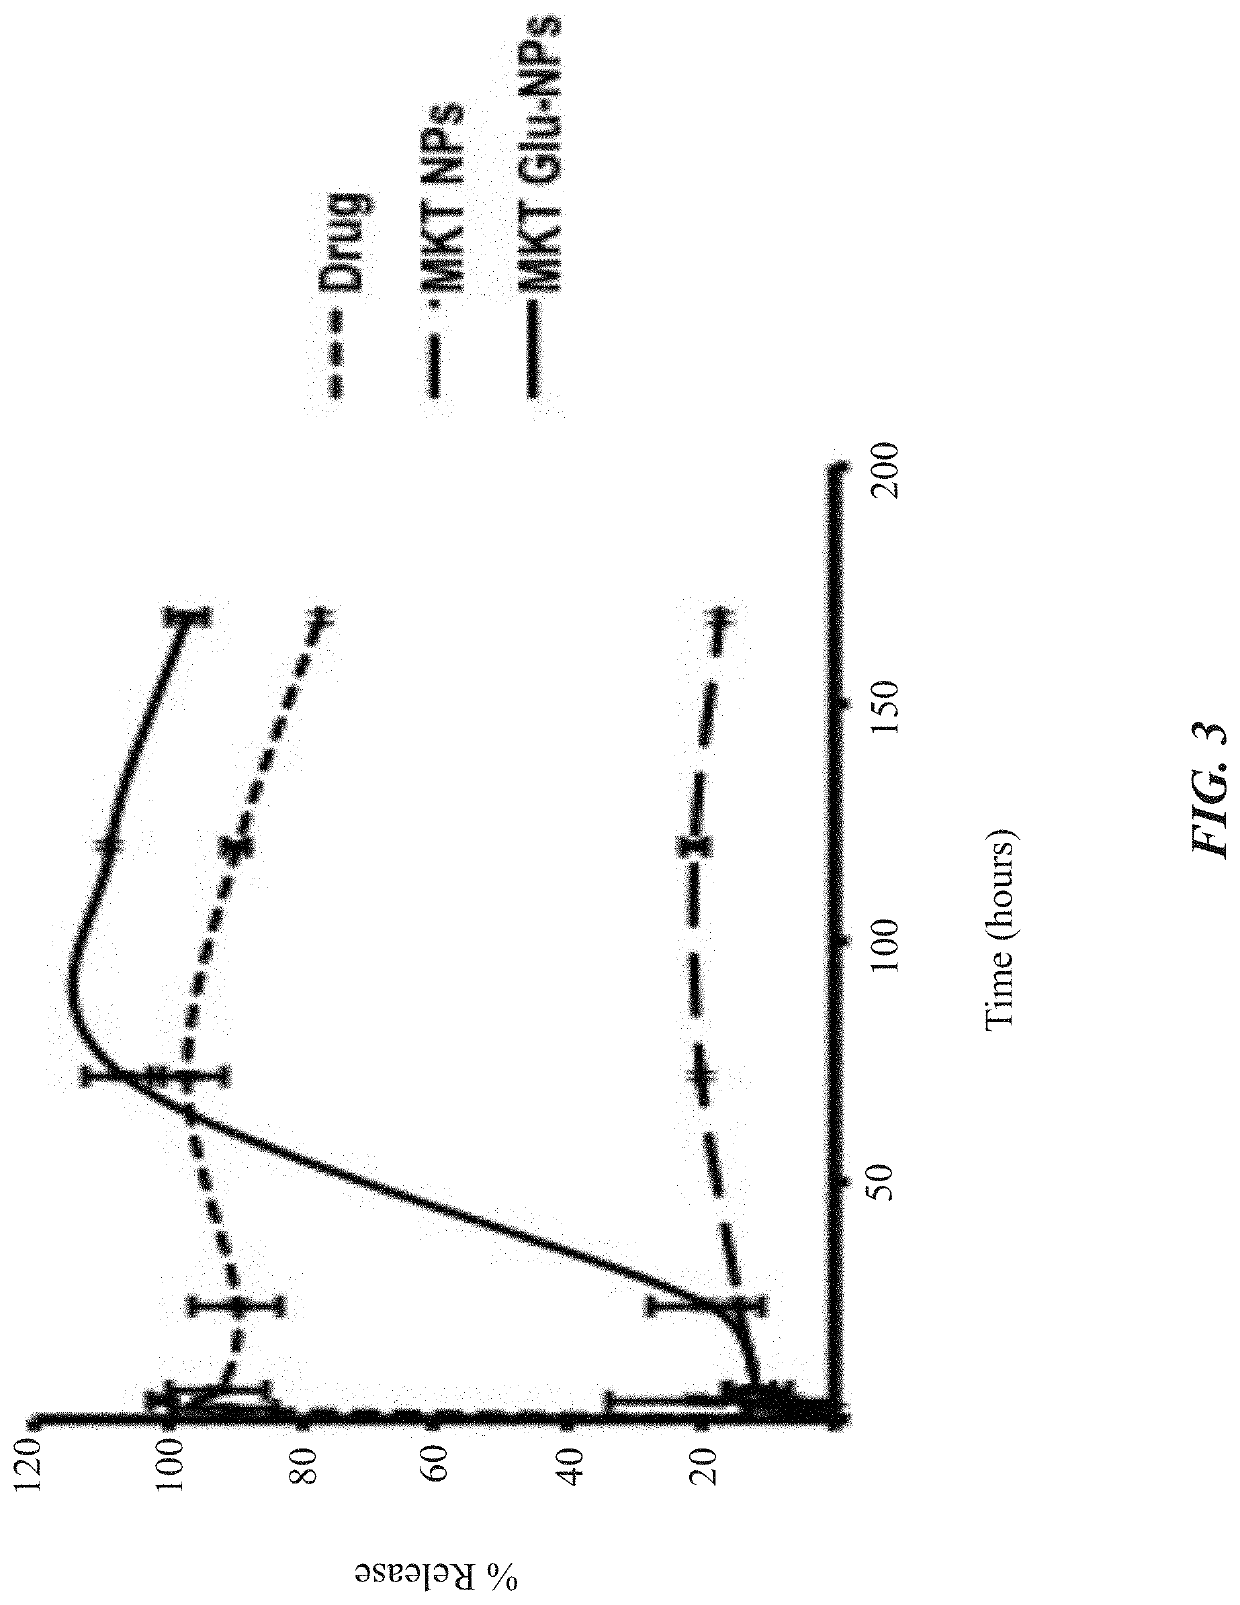 Glutathione-coated nanoparticles for delivery of MKT-077 across the blood-brain barrier